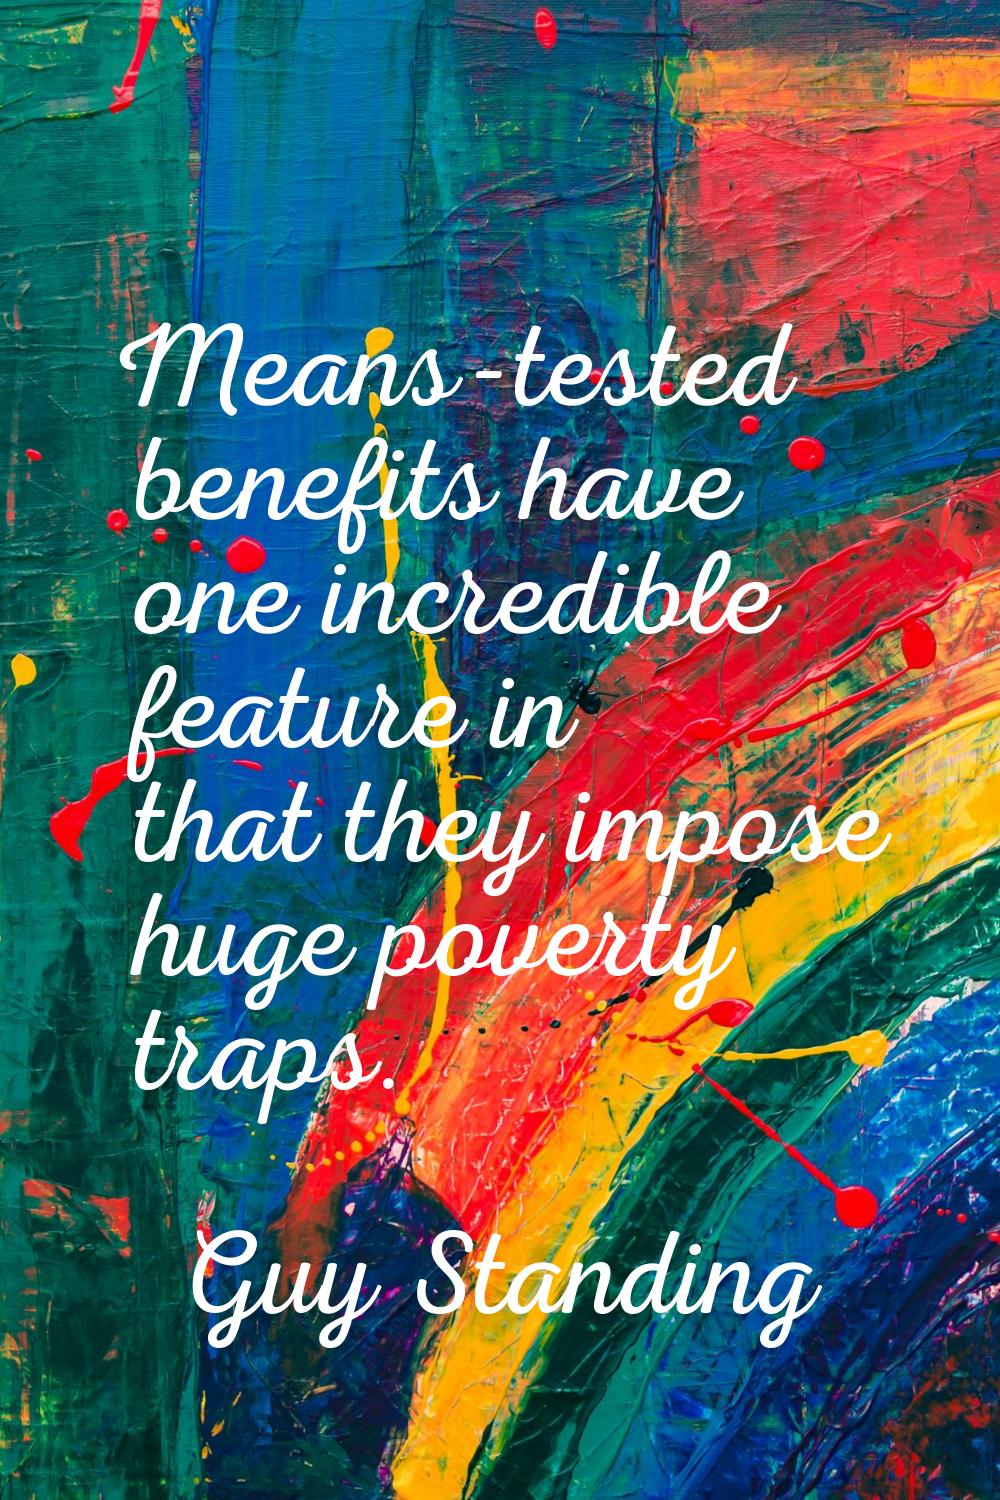 Means-tested benefits have one incredible feature in that they impose huge poverty traps.